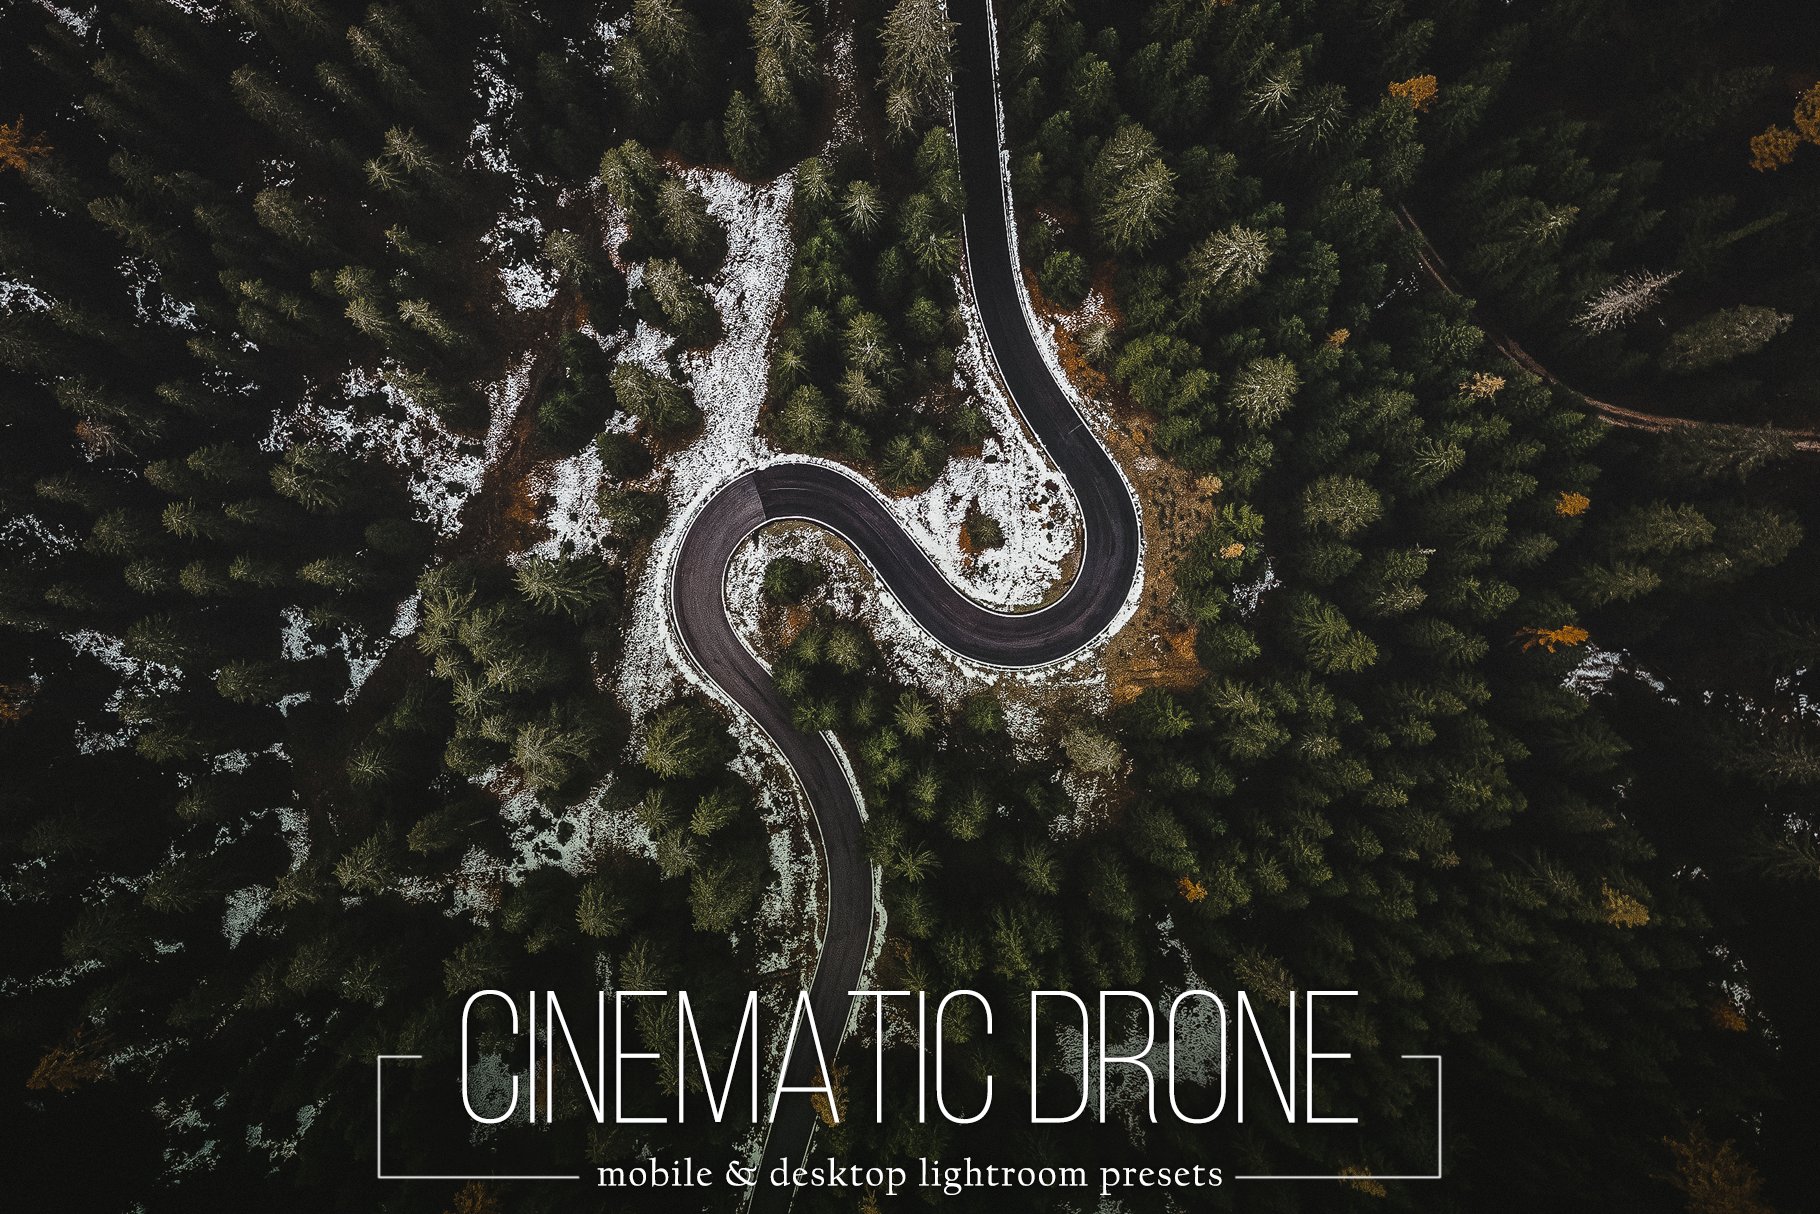 Cinematic Drone Lightroom Presetscover image.